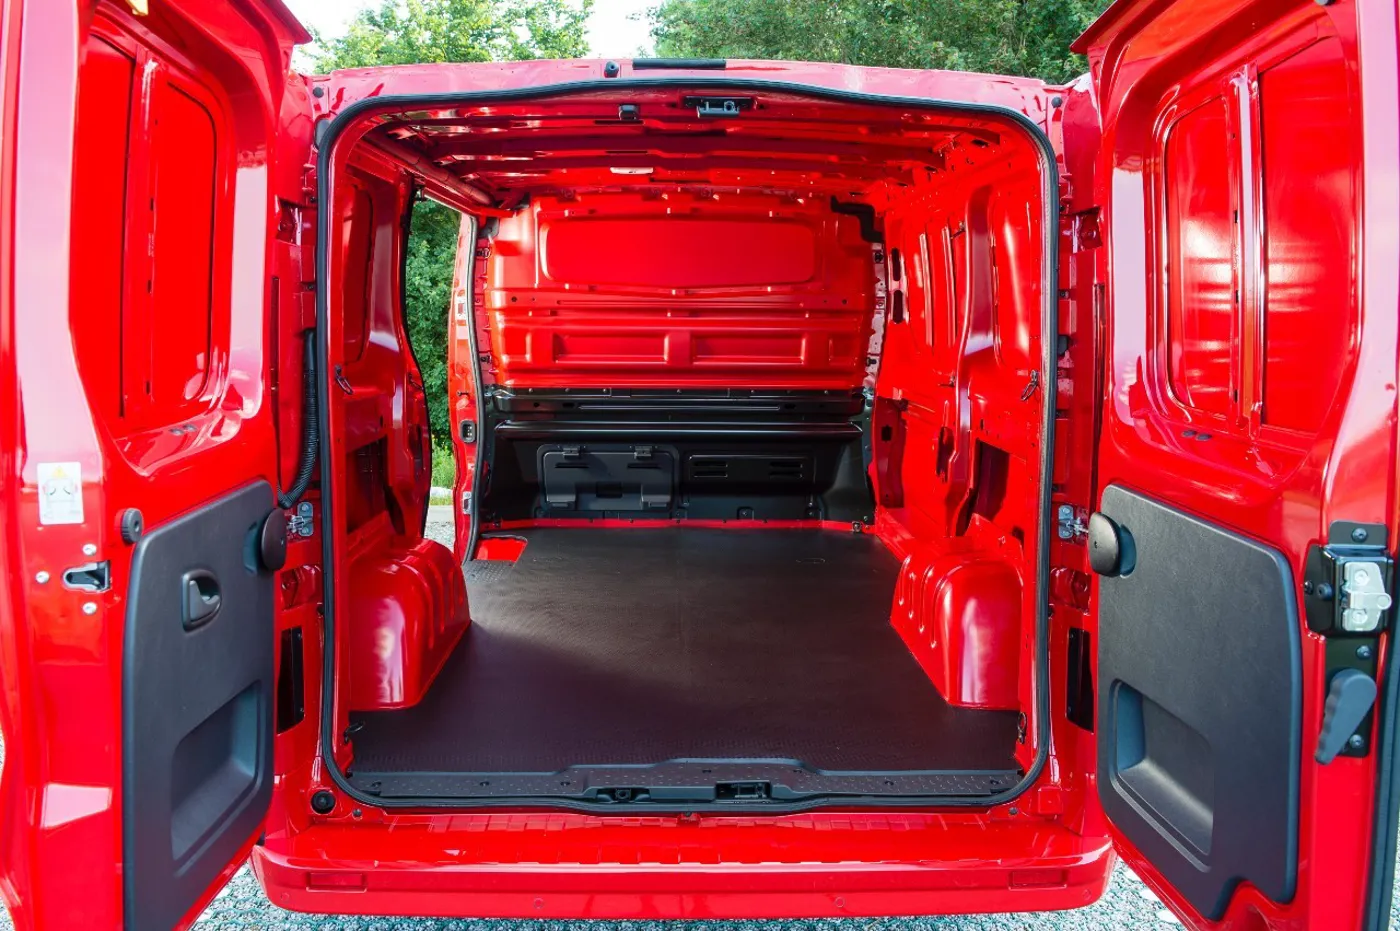 Vauxhall's Vivaro might be a top performer but price will push fleets away